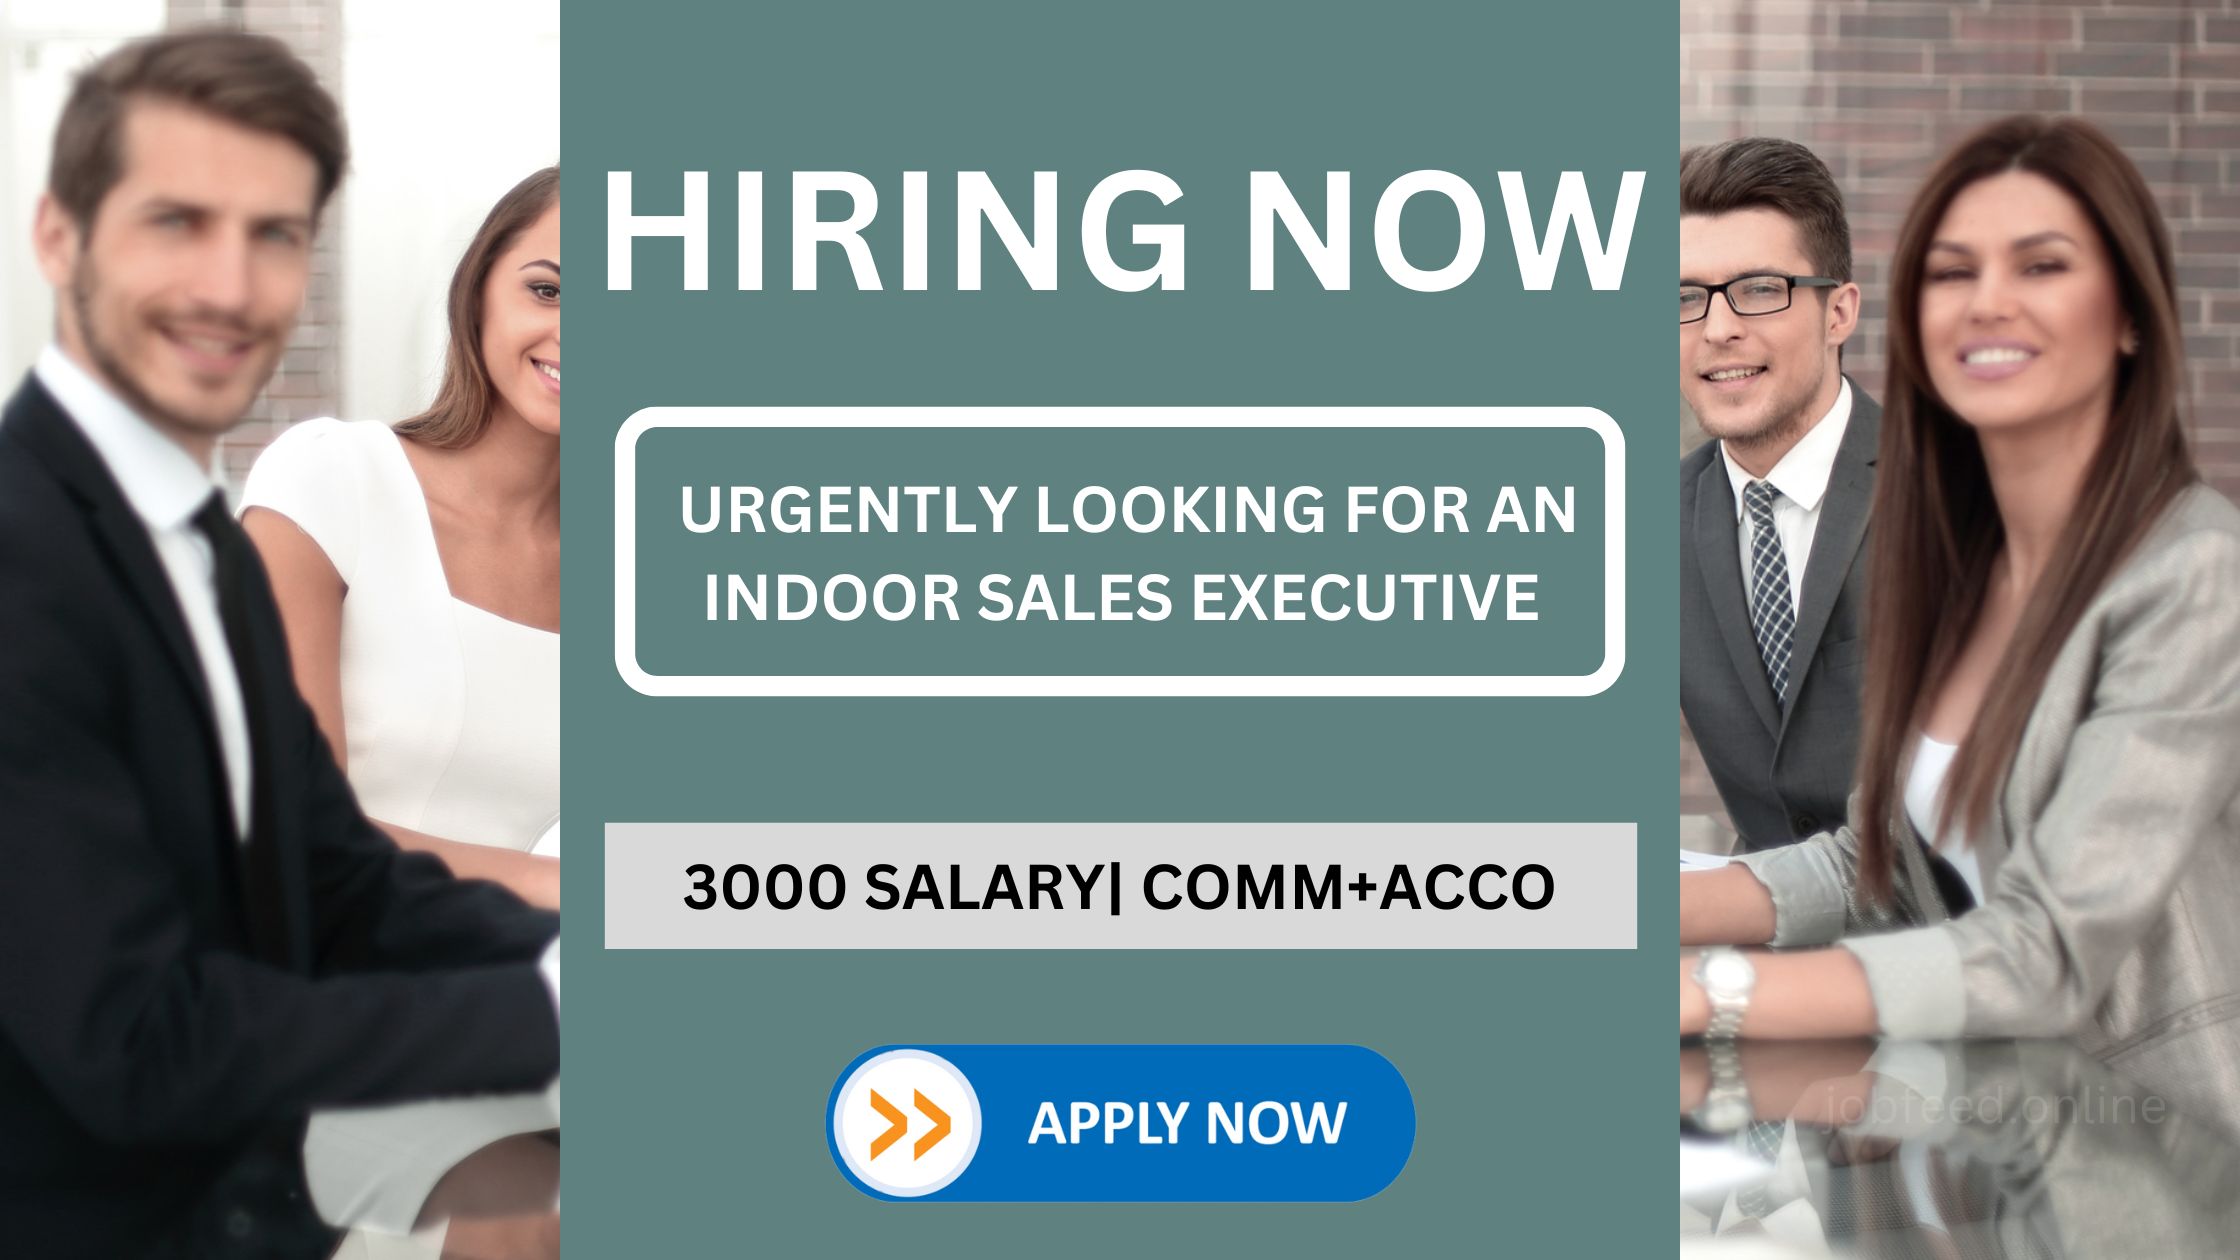 Urgently Looking For an Sales Executive